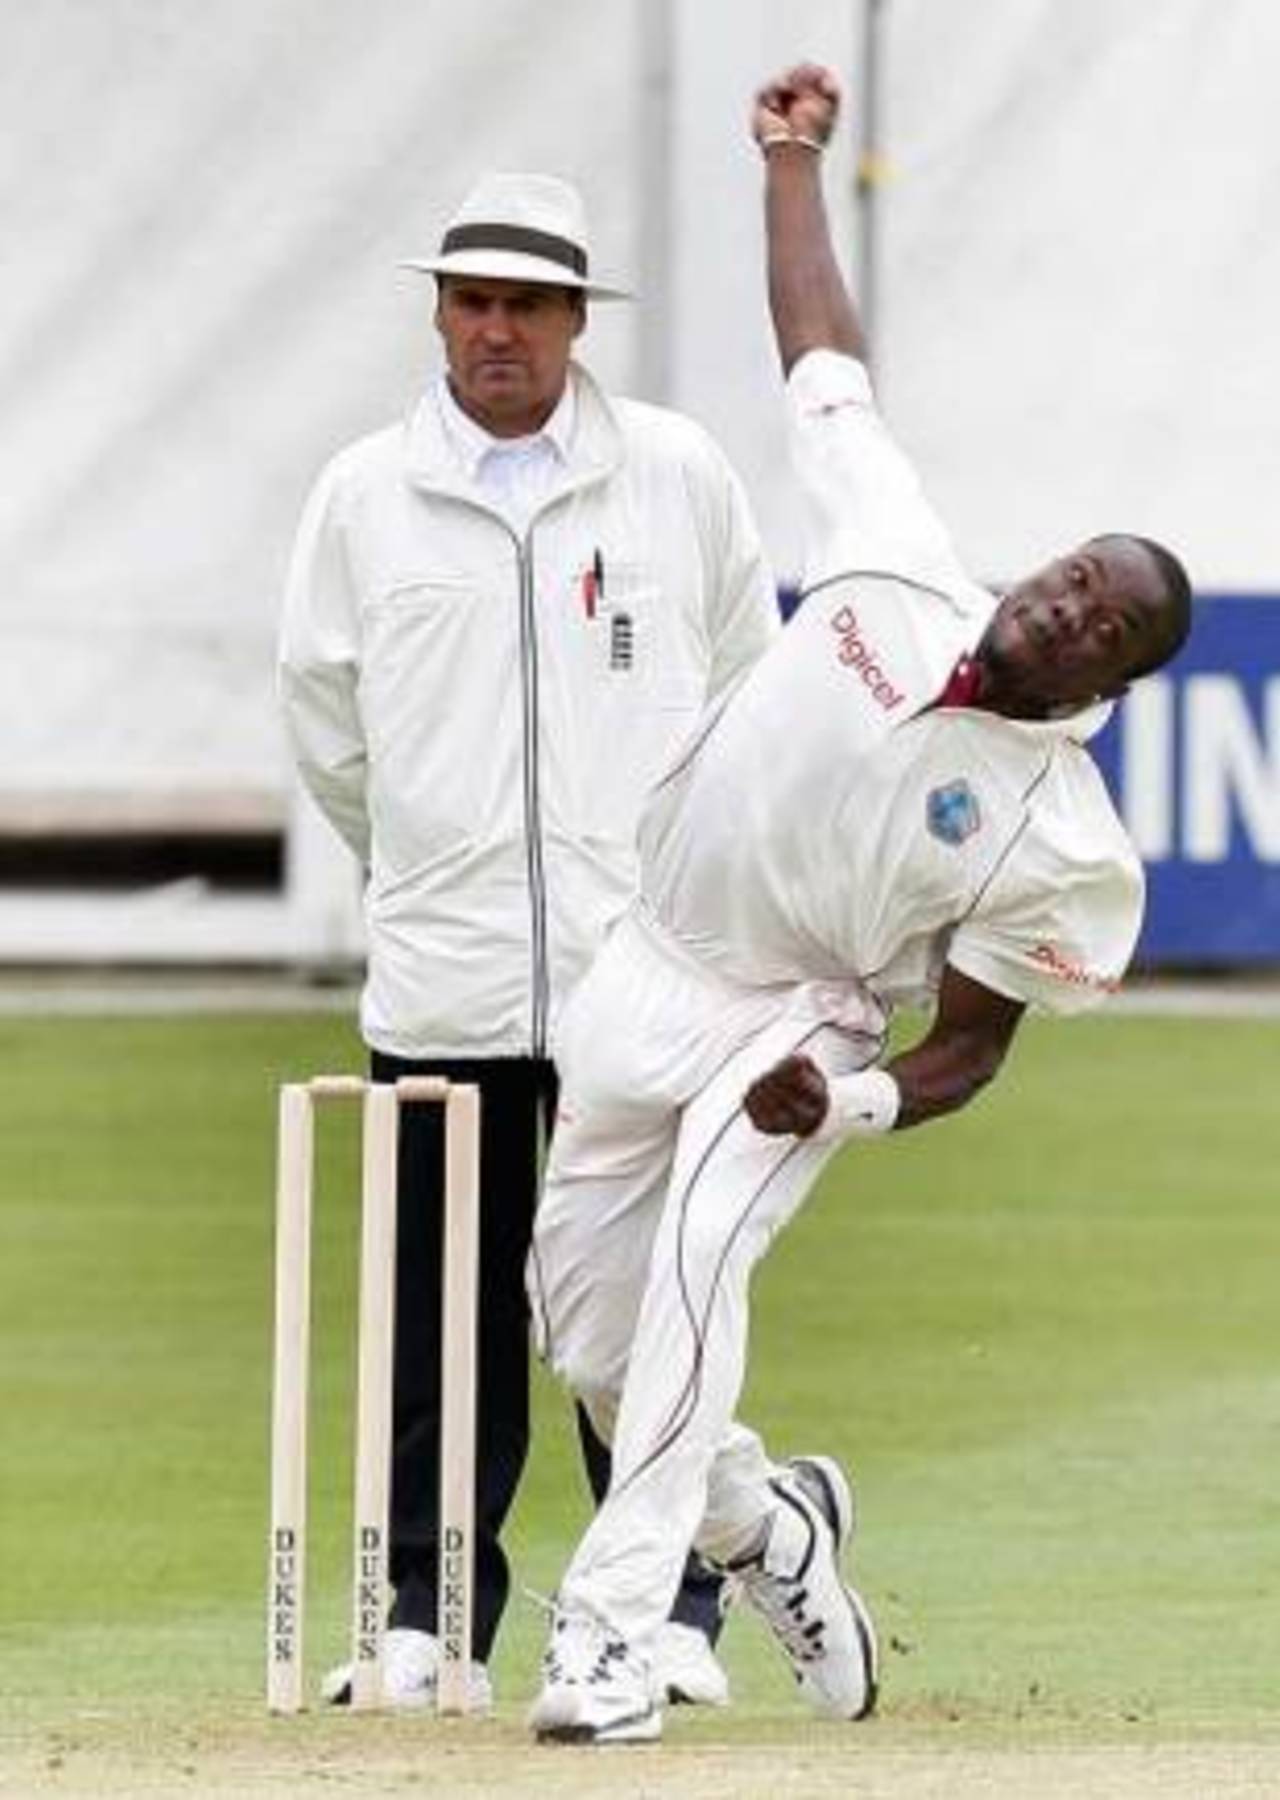 Nelon Pascal, one of the new faces for West Indies, in action against Essex, Essex v West Indies, Chelmsford, April 25, 2009